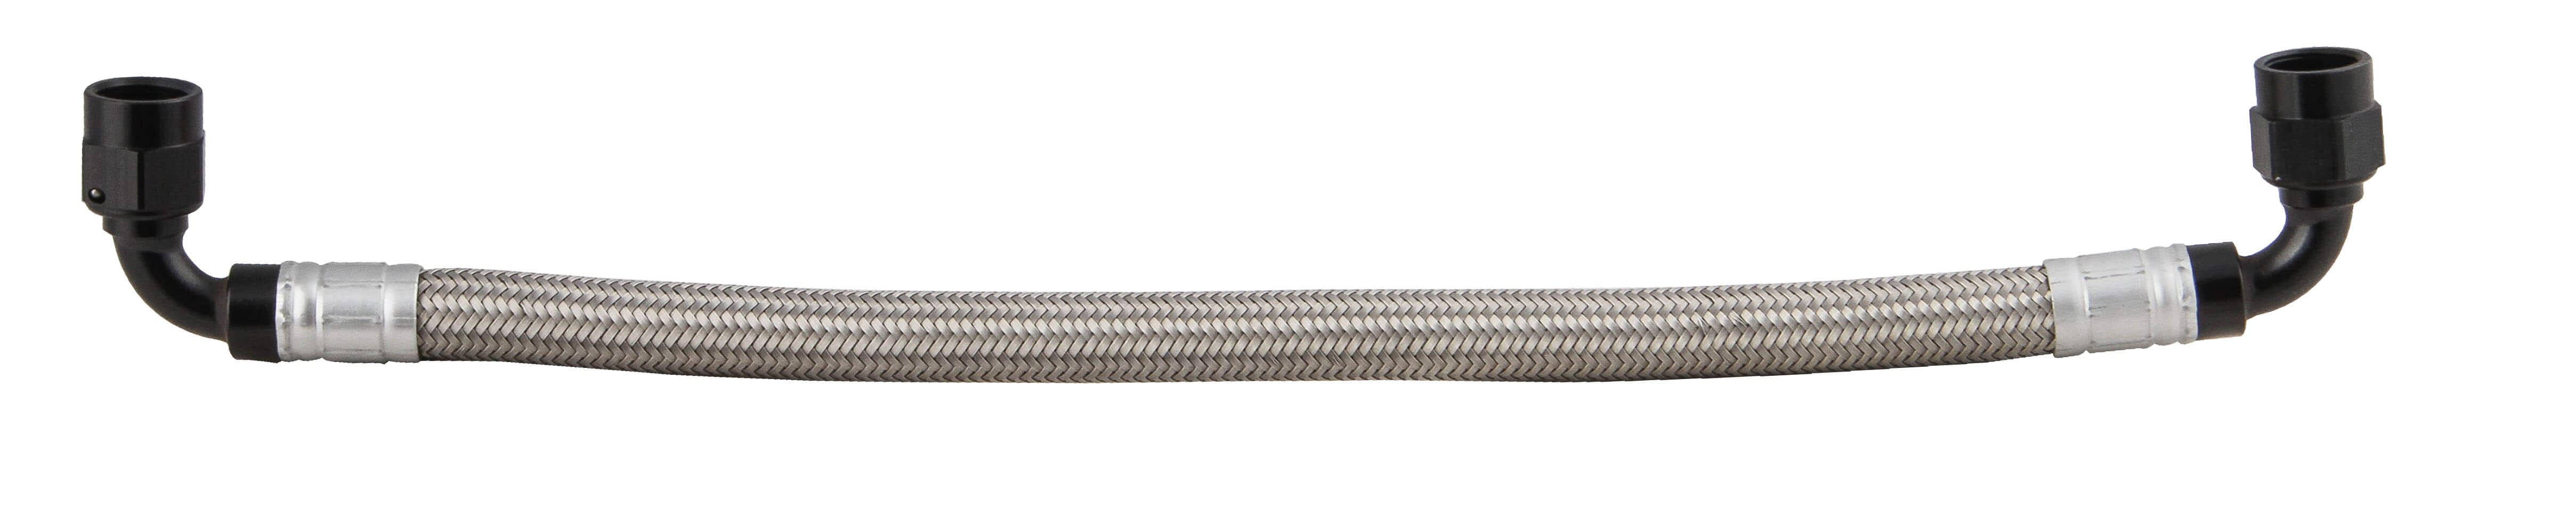 Earls GM LS Fuel Rail Cross-Over Hose -8 Stainless Braided Hose